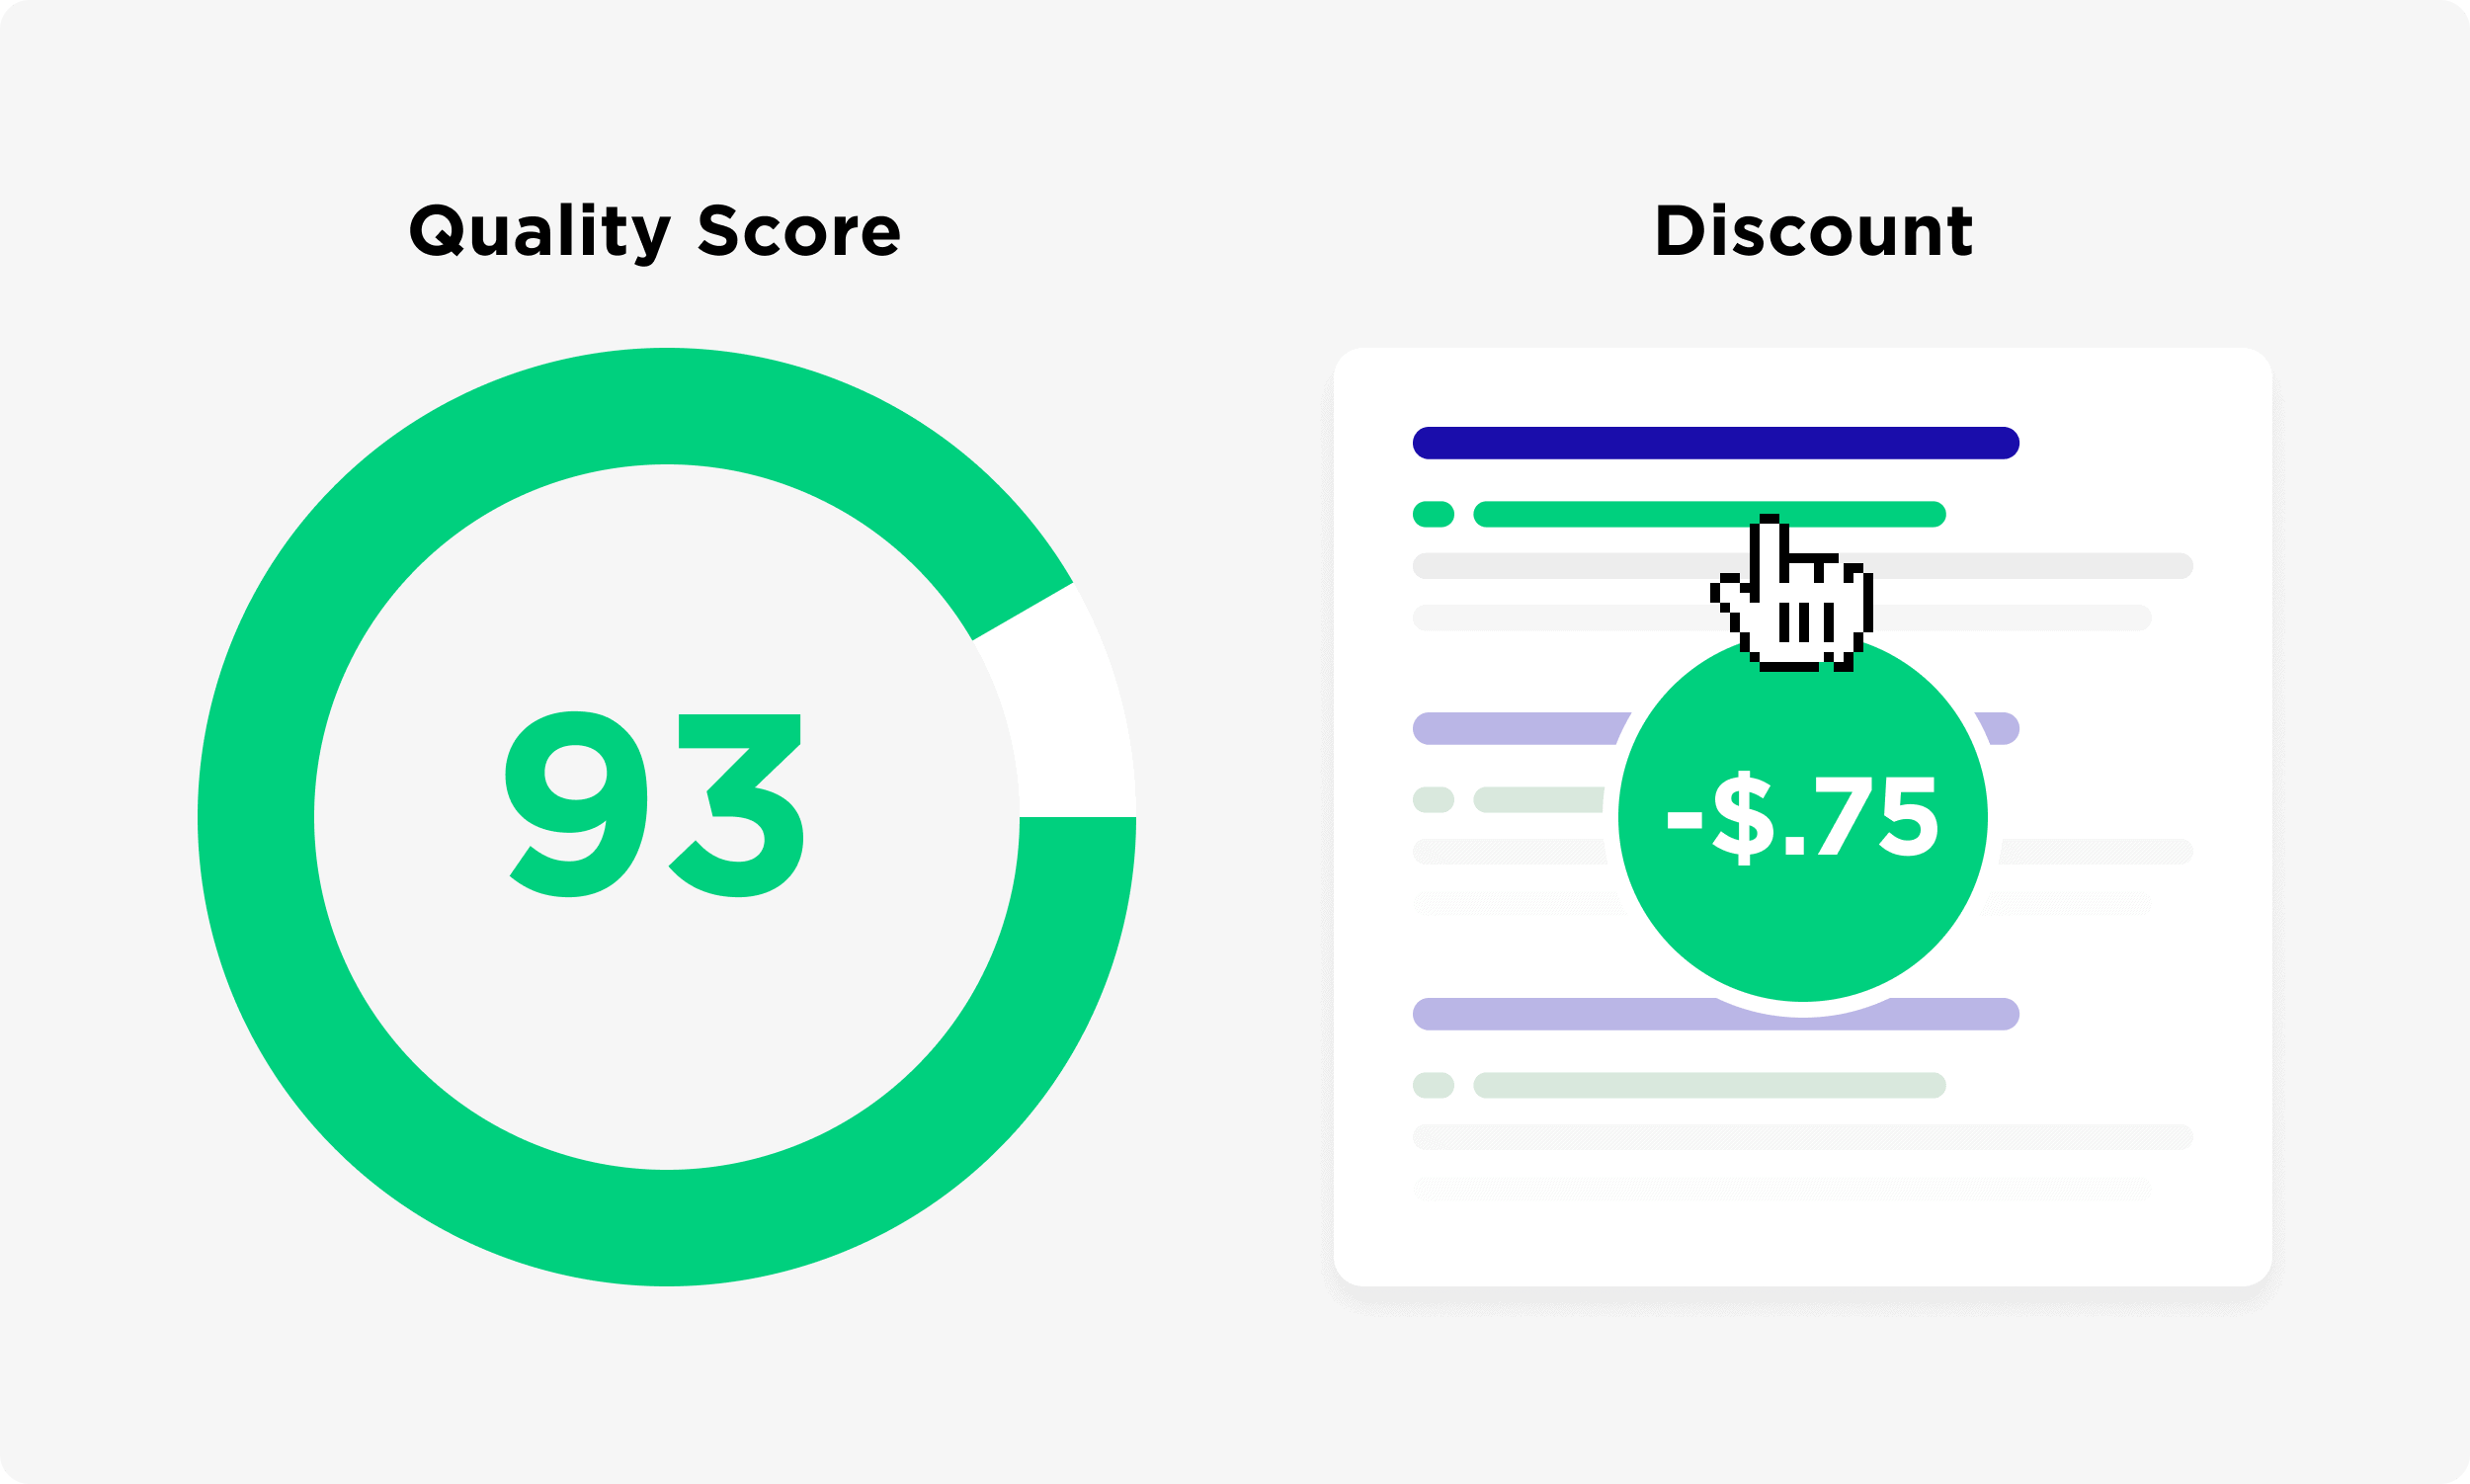 high quality score means you will get adiscount for each click